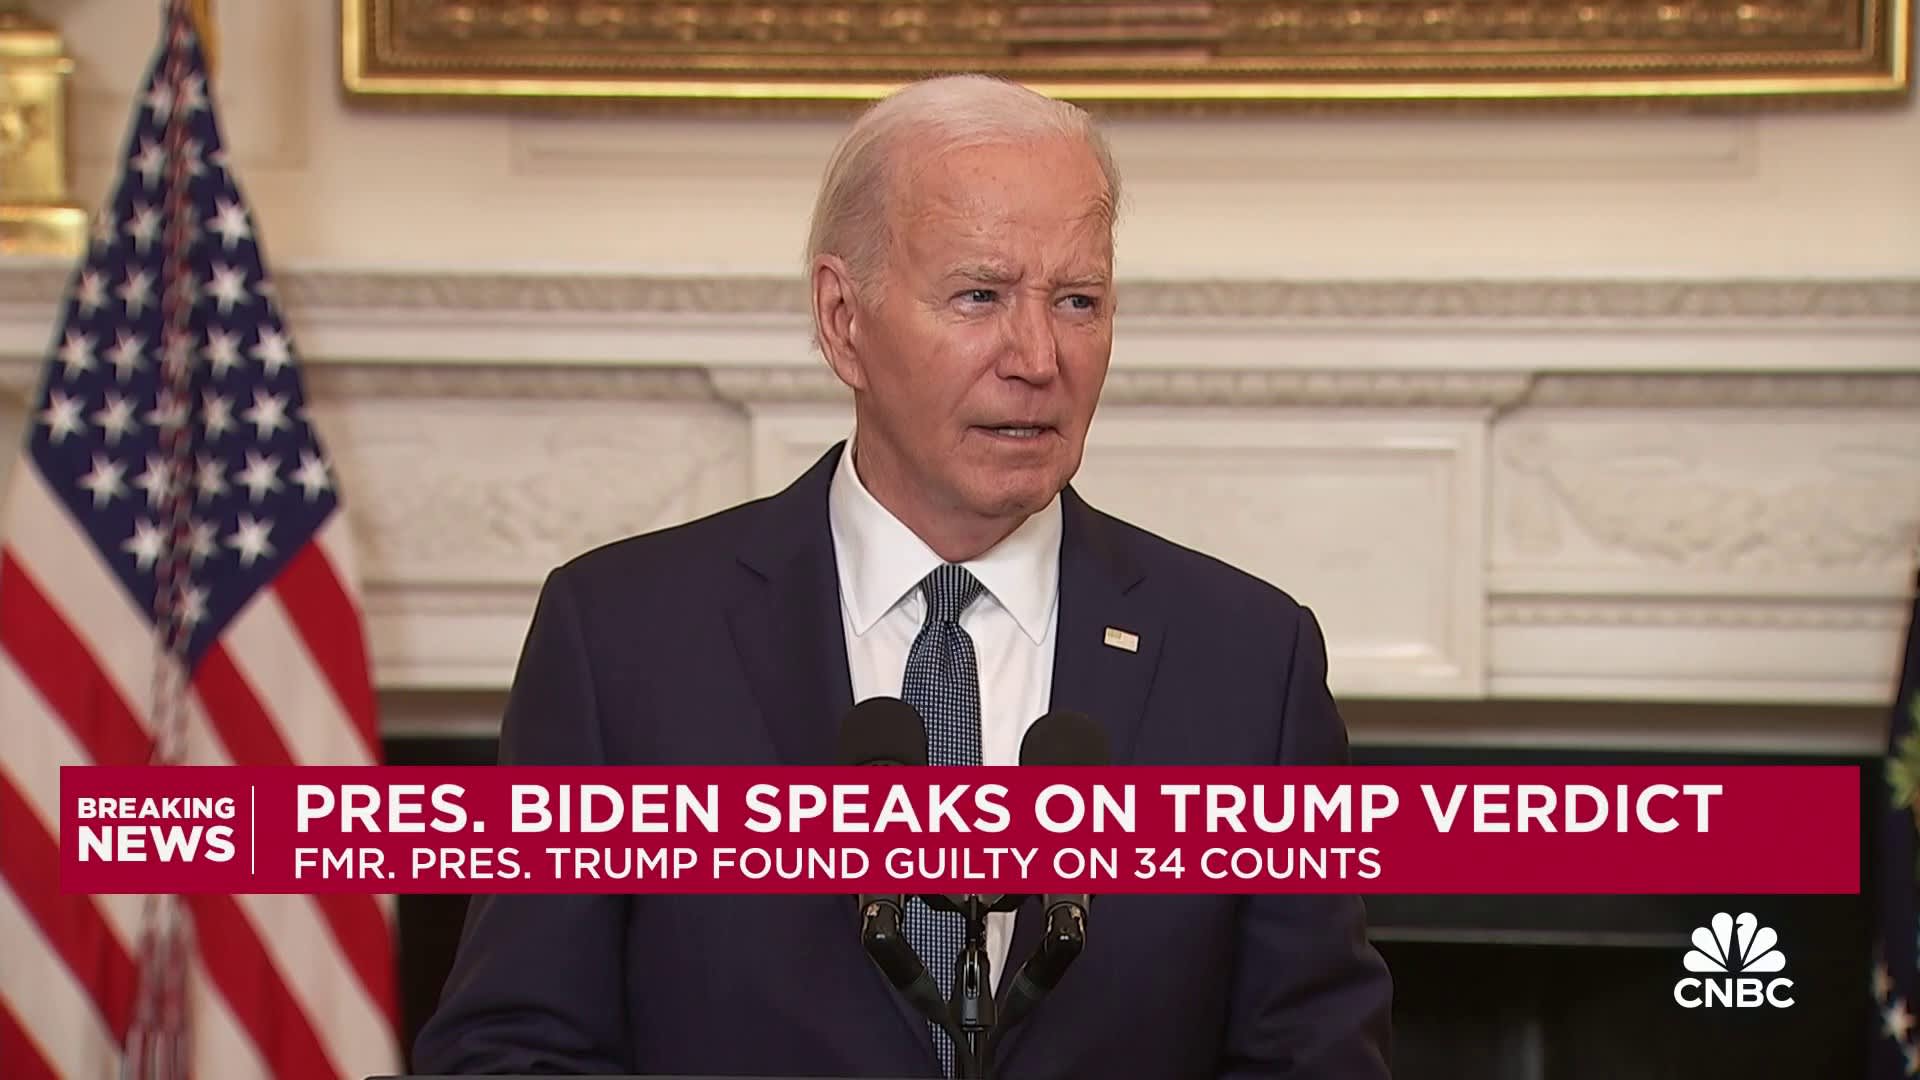 Biden on Trump guilty verdict: It's reckless and dangerous to say trial was rigged